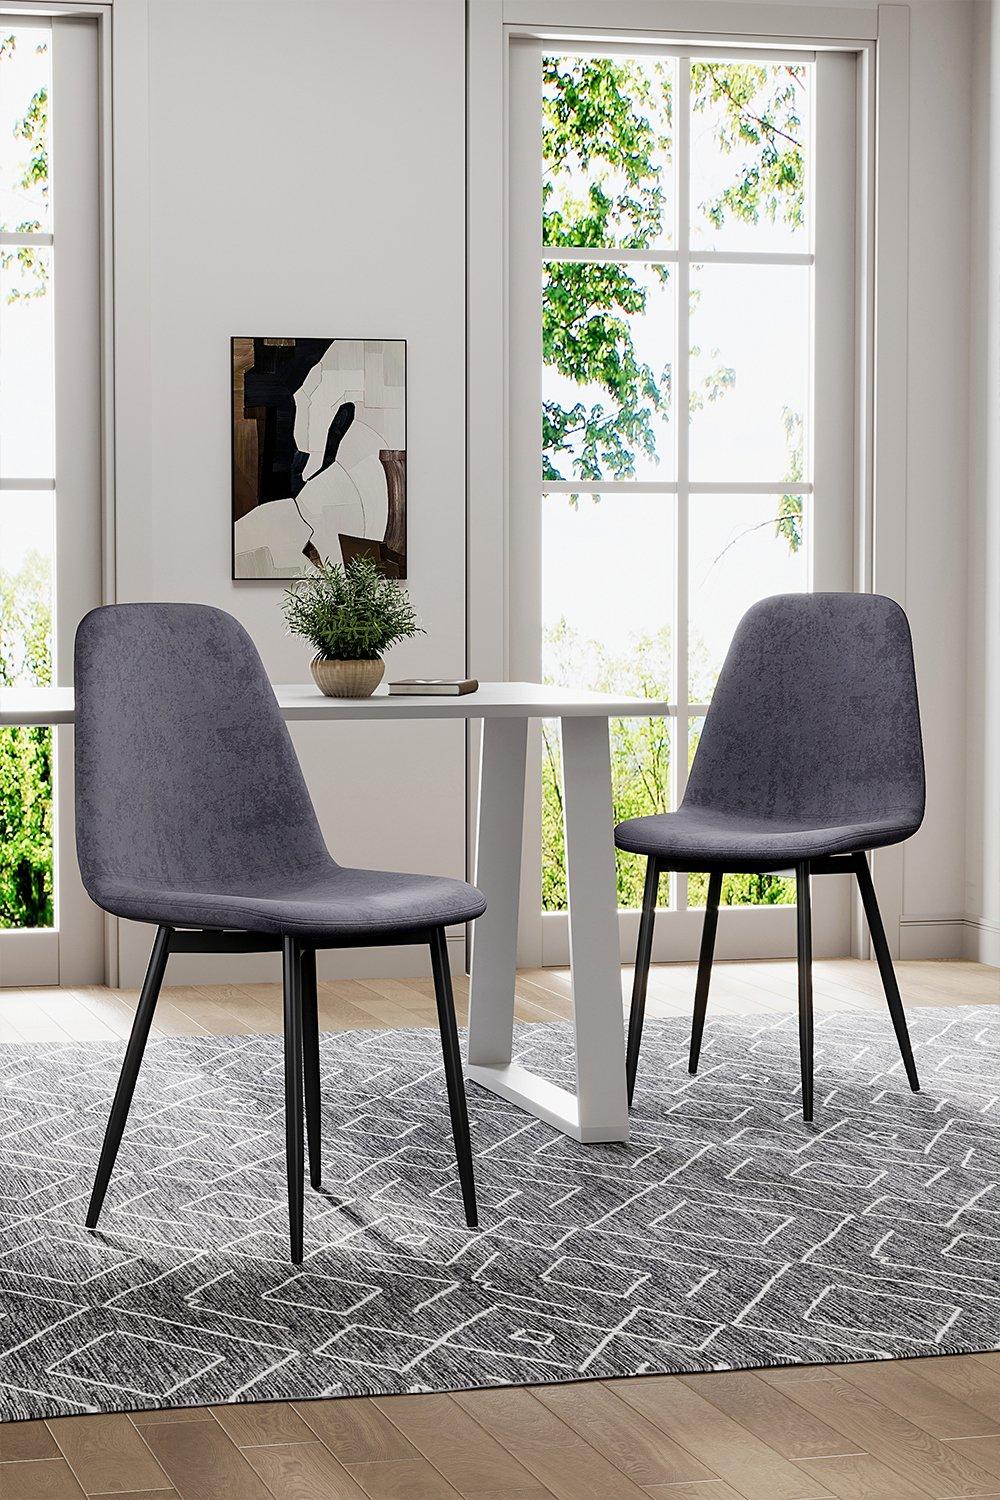 Set of 2 Velvet Diamond Patterned Back Upholstered Dining Chairs with Metal Legs